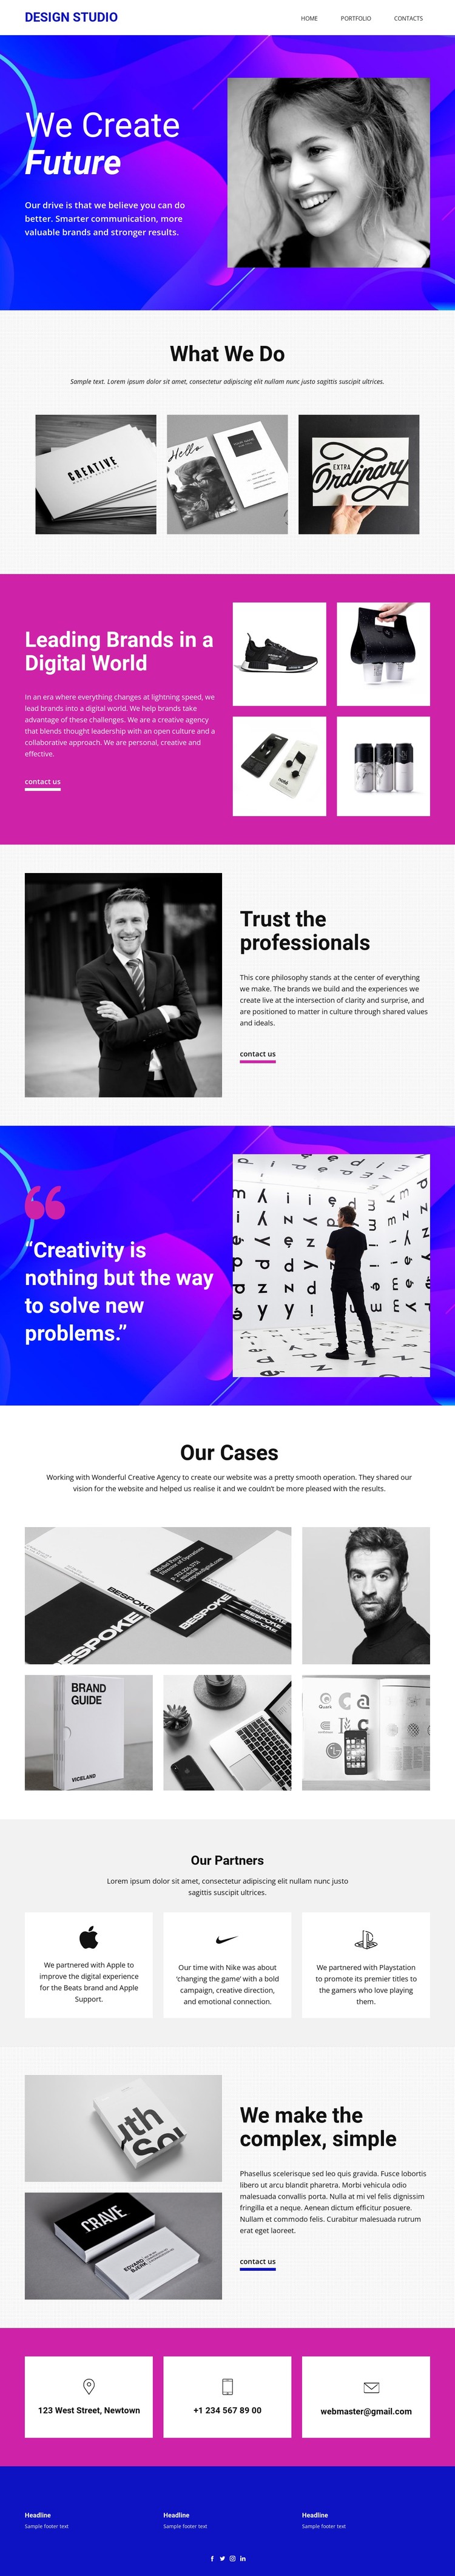 We develop the brand’s core CSS Template